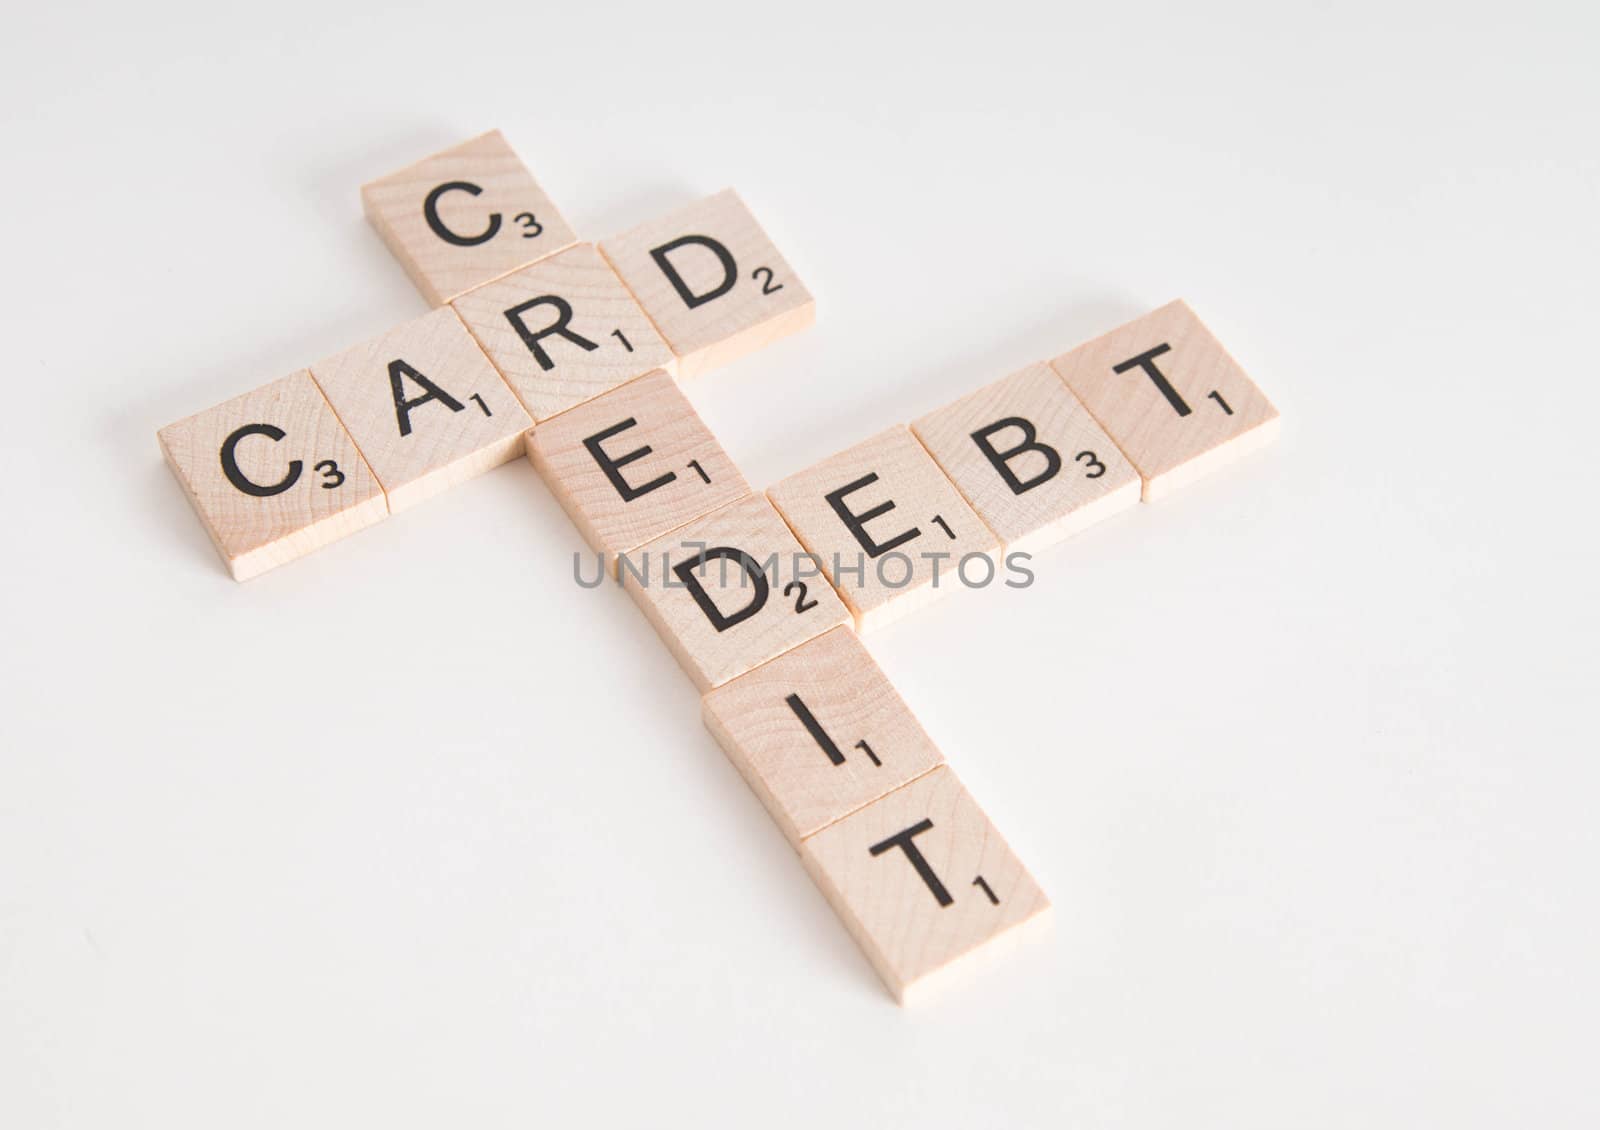 "Credit Card Debt" concept spelled in Scrabble letters. Isolated on white background.